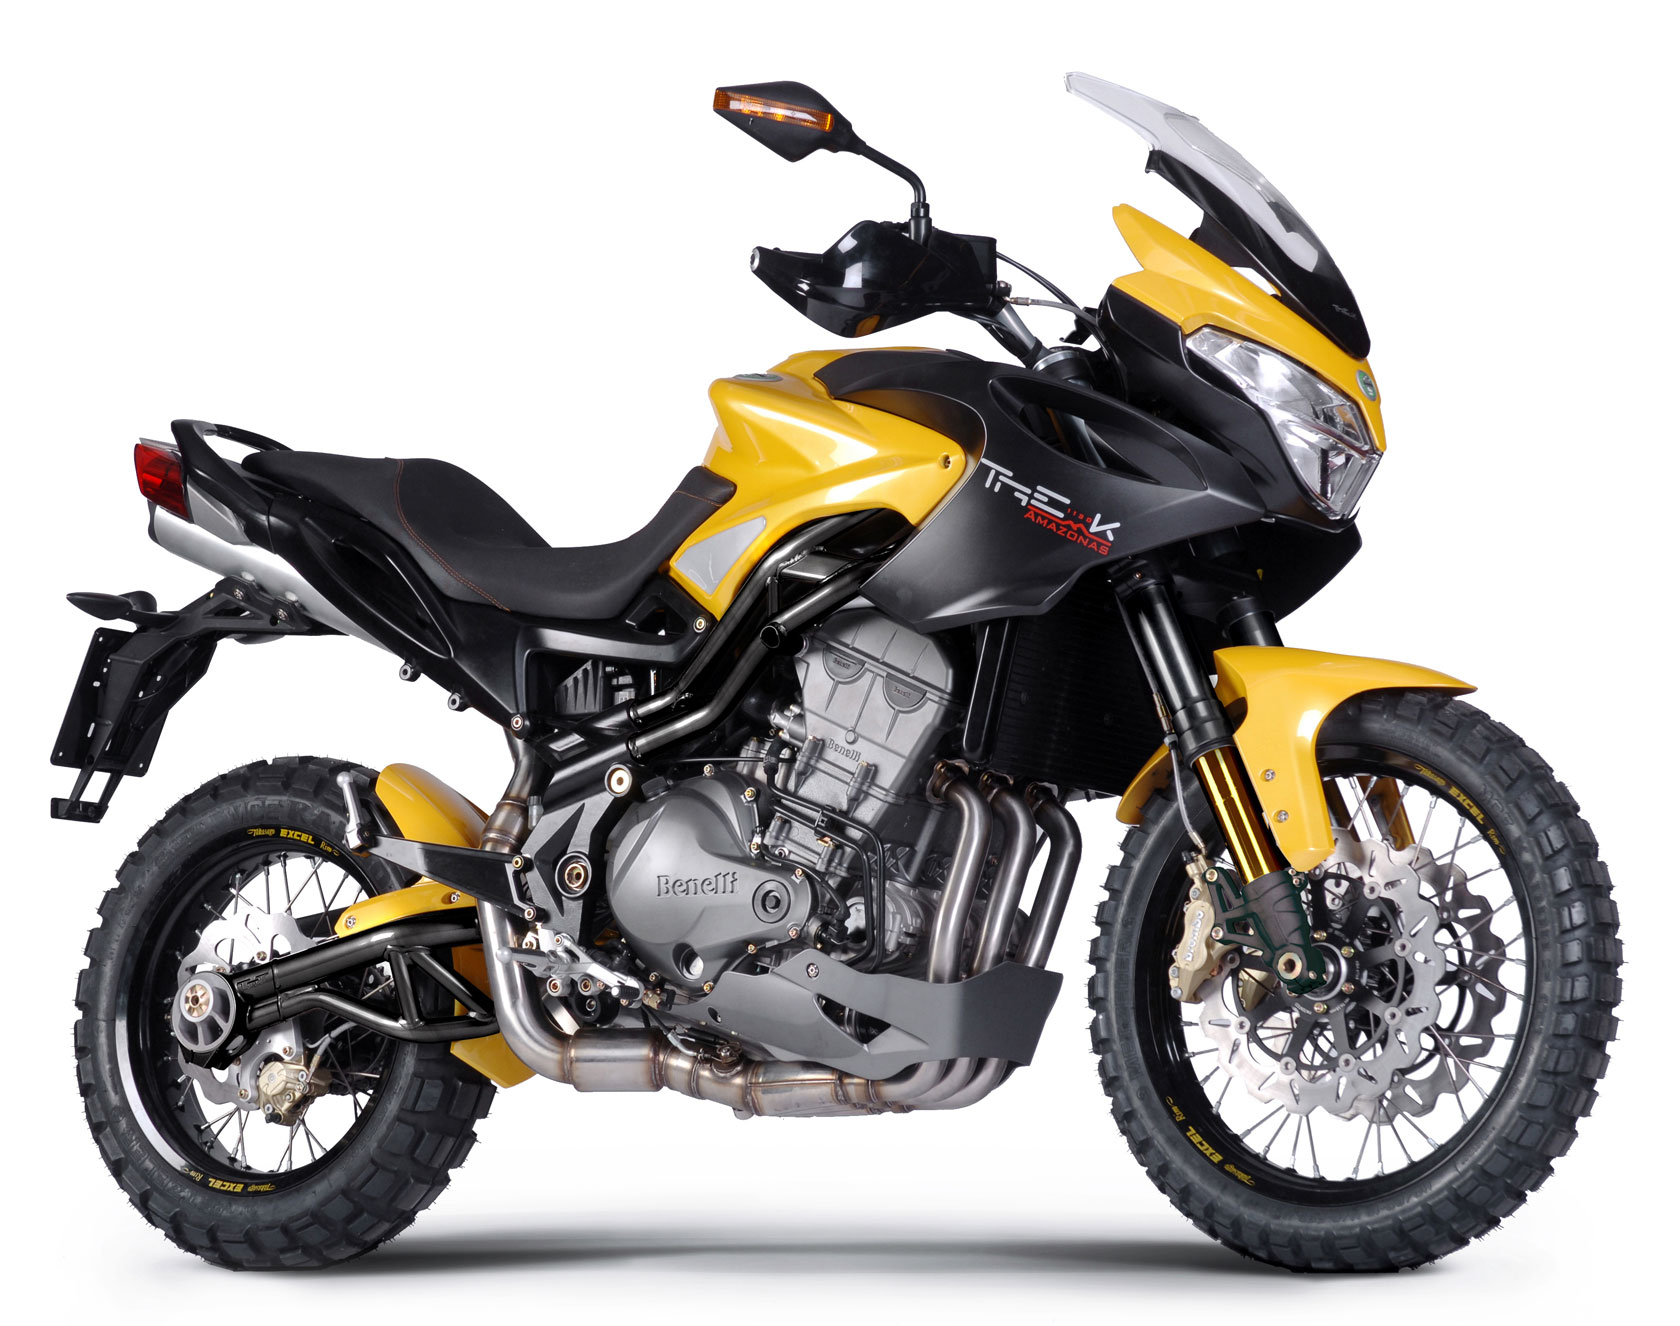 2011 Benelli Motorcycle Models